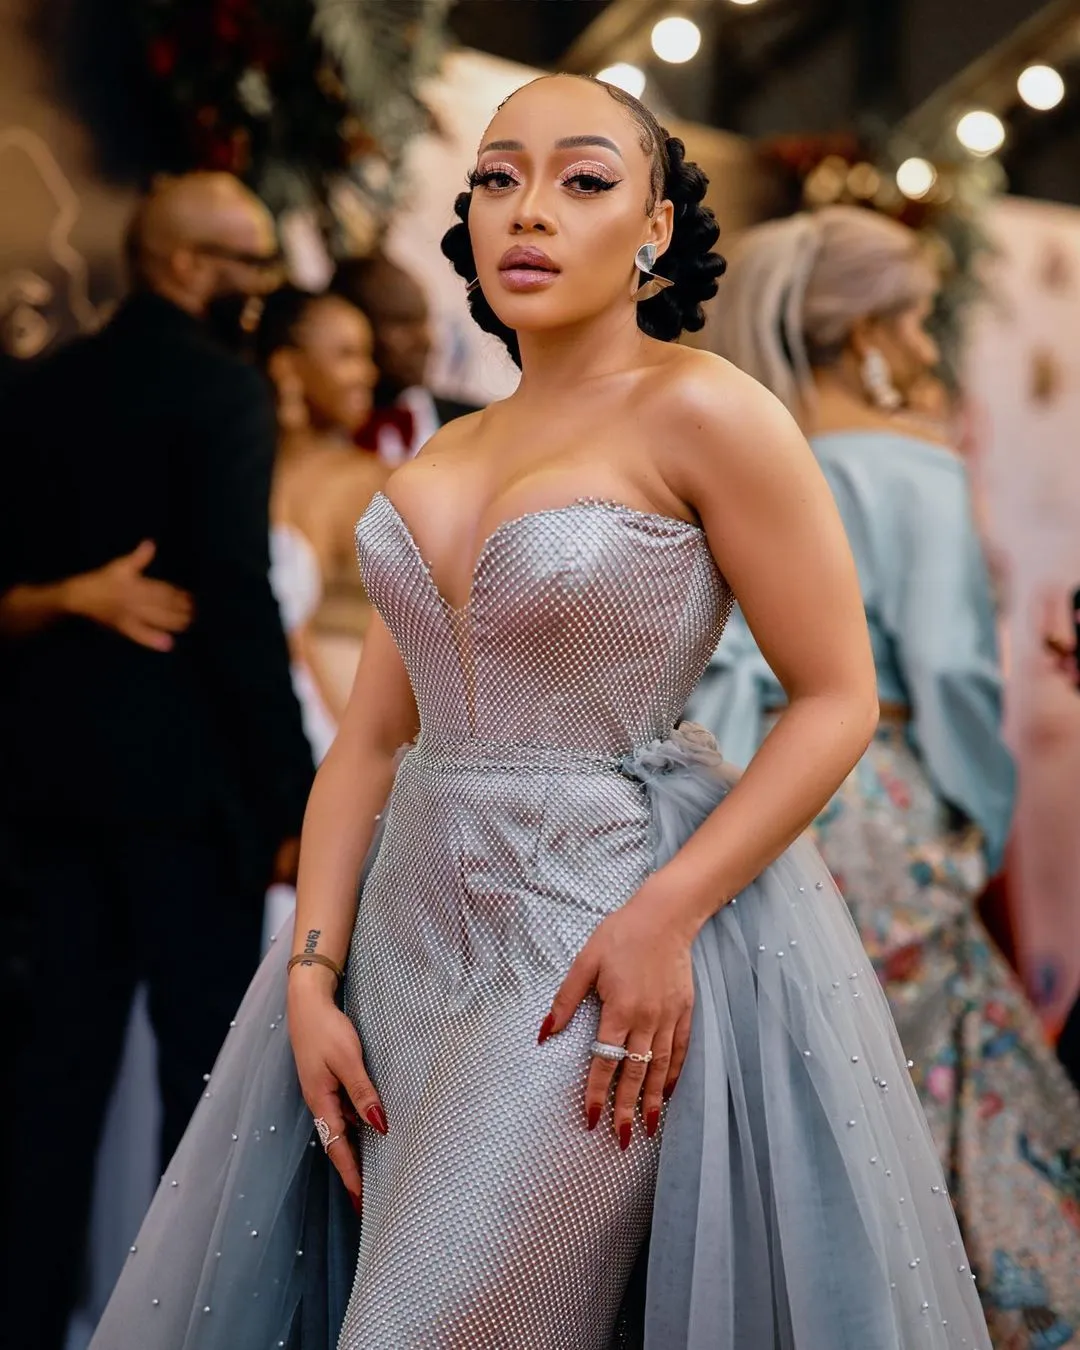 Prayers pour in for hospitalized Thando Thabethe